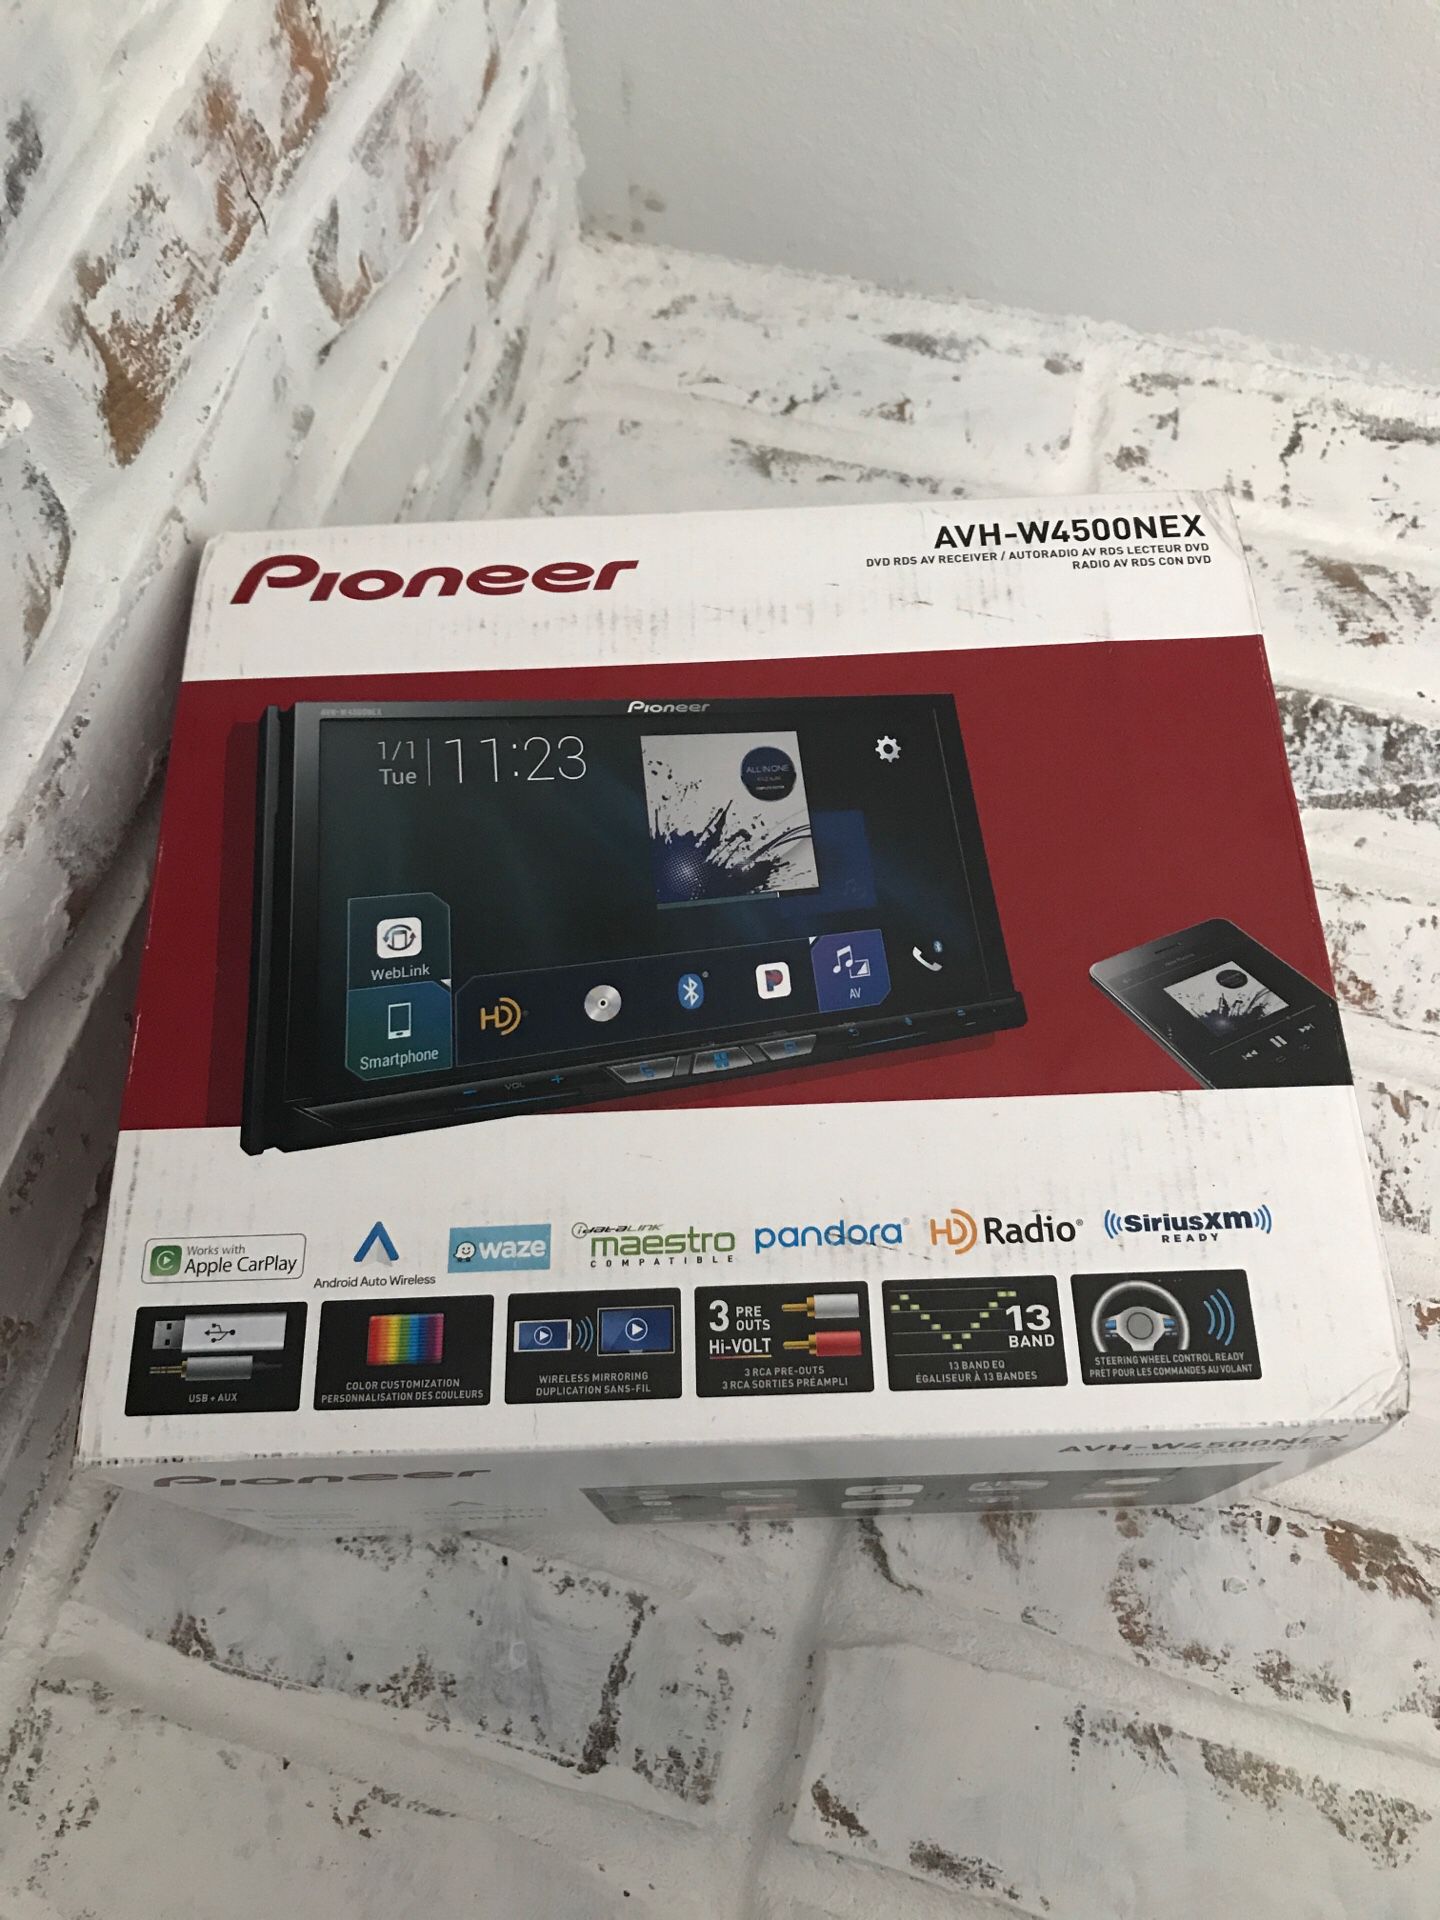 Pioneer AVH-W4500NEX Double DIN Wireless Mirroring Android Auto, Carplay In-Dash DVD/CD Car Stereo Receiver, 7" Touchscreen